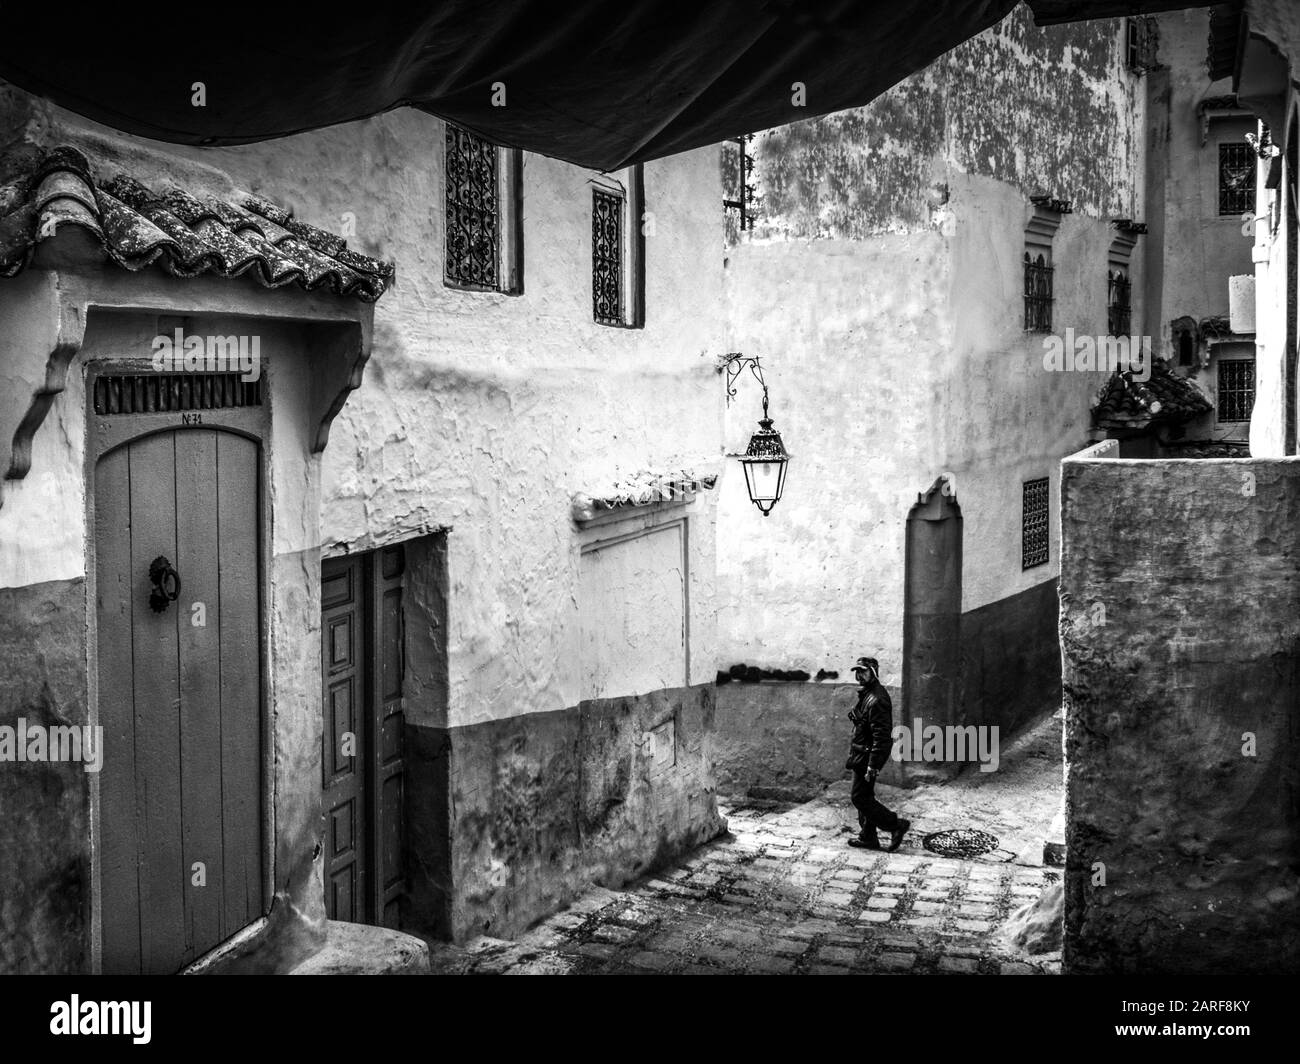 Chefchaouen Black and White Stock Photos & Images - Alamy